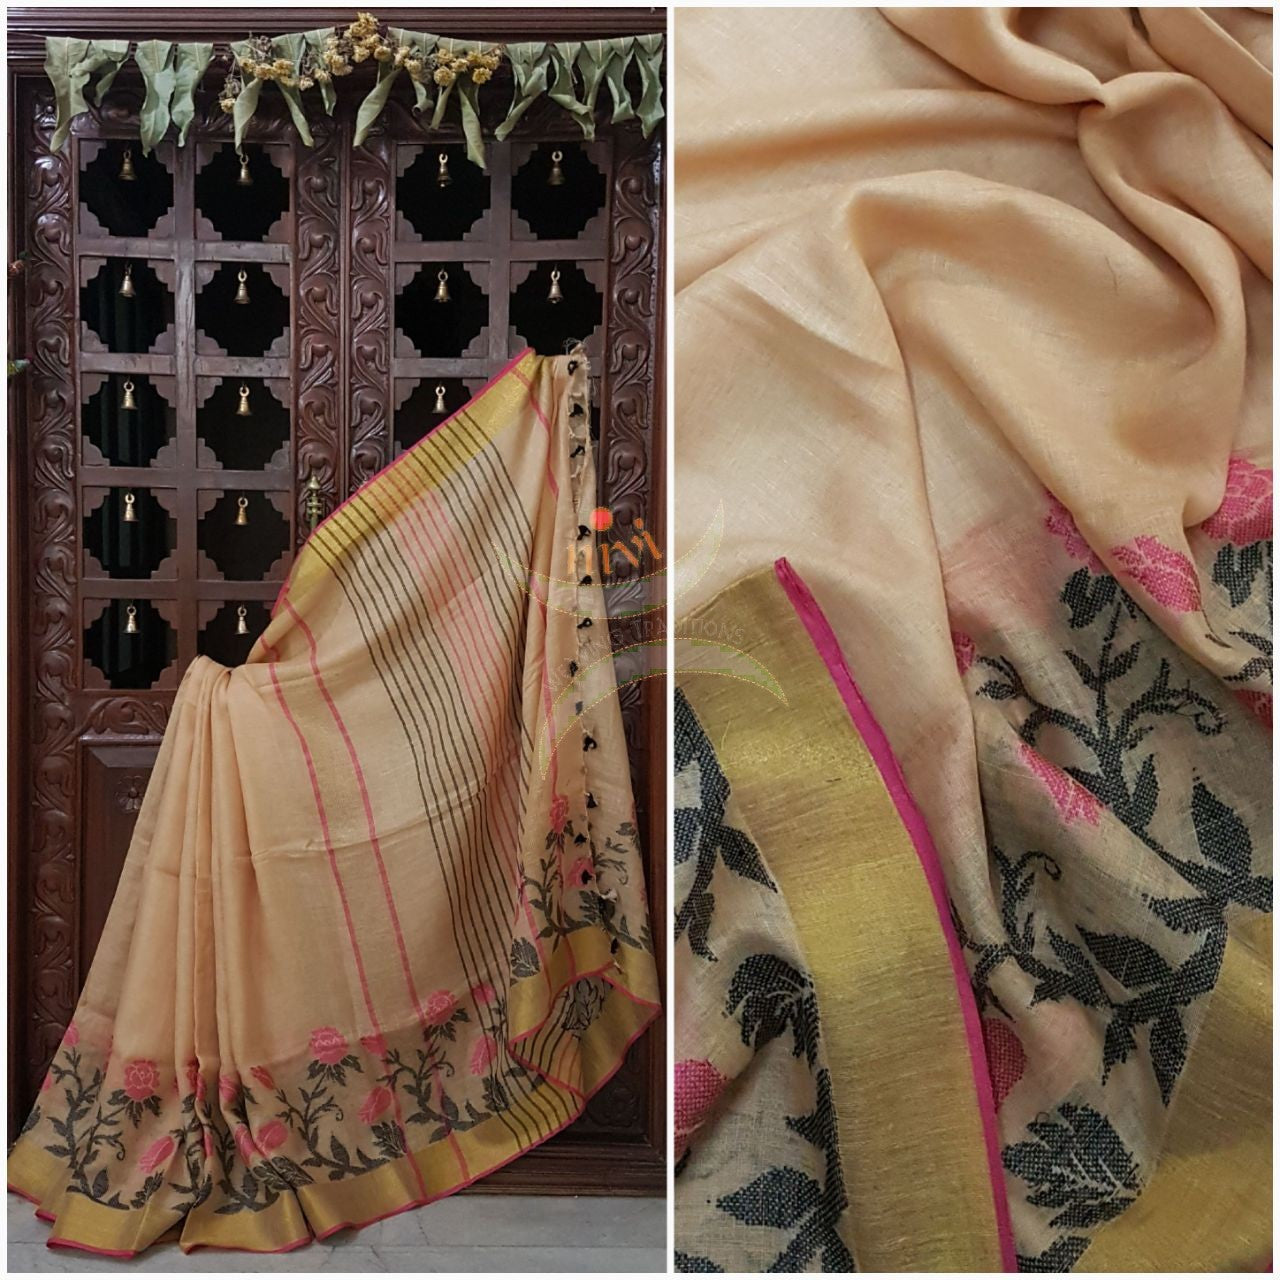 Cream Handloom 100s count Linen saree with woven floral pattern and zari border.